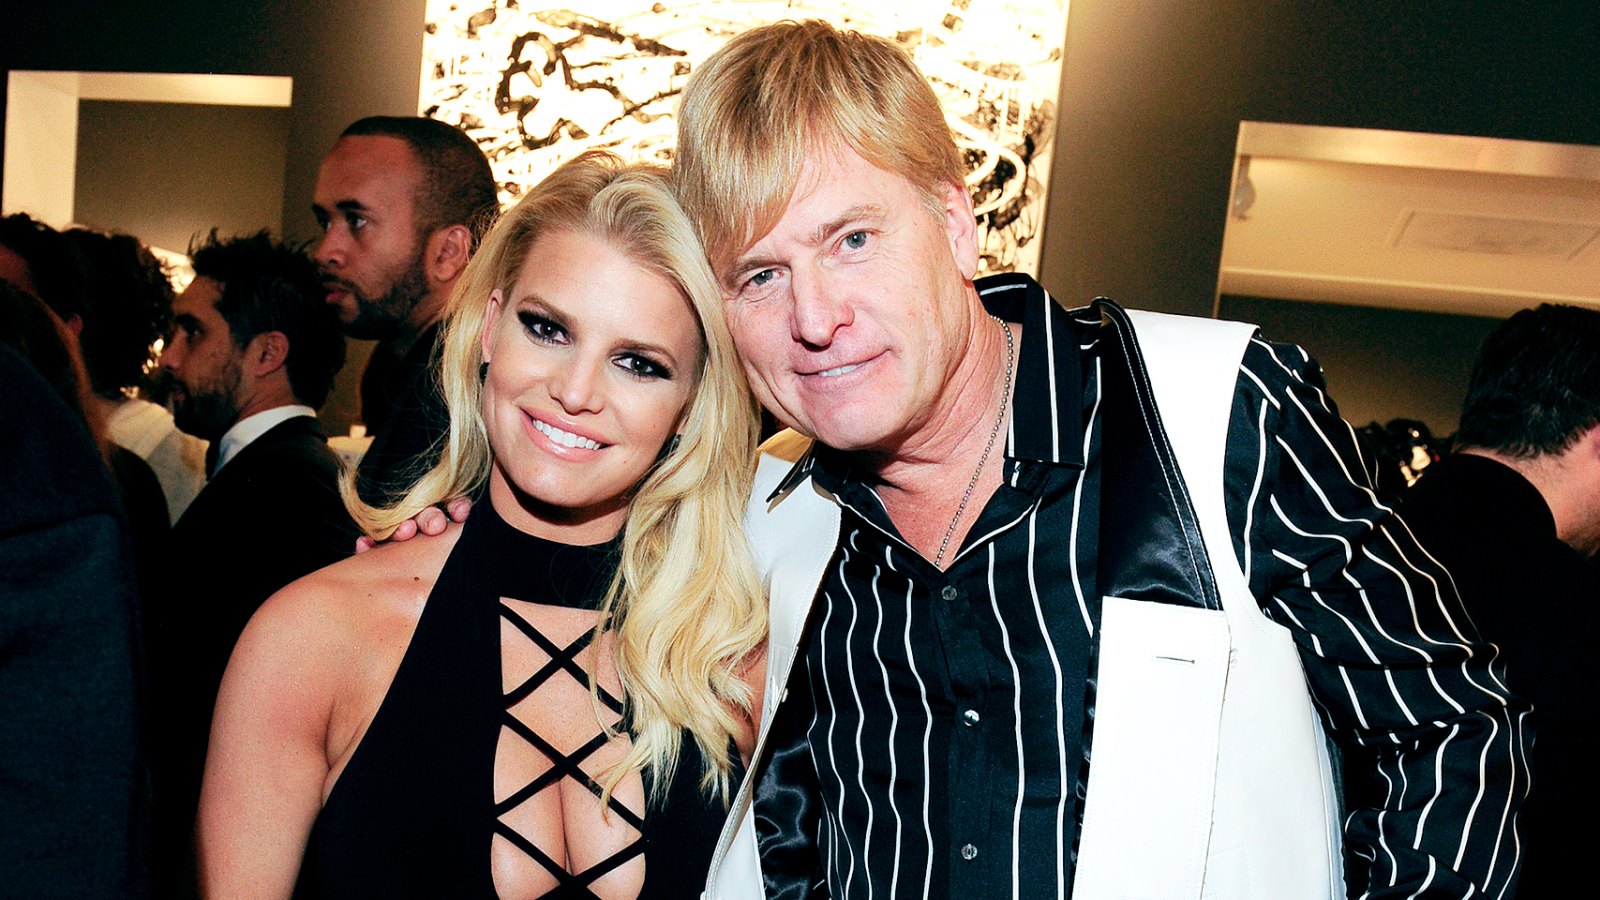 Jessica Simpson and Joe Simpson attend the "Tom Everhart "Raw" Exhibition of His Schulz-influenced Paintings For The First Time In Black And White At Mouche Gallery on February 27, 2016 in Beverly Hills, California.